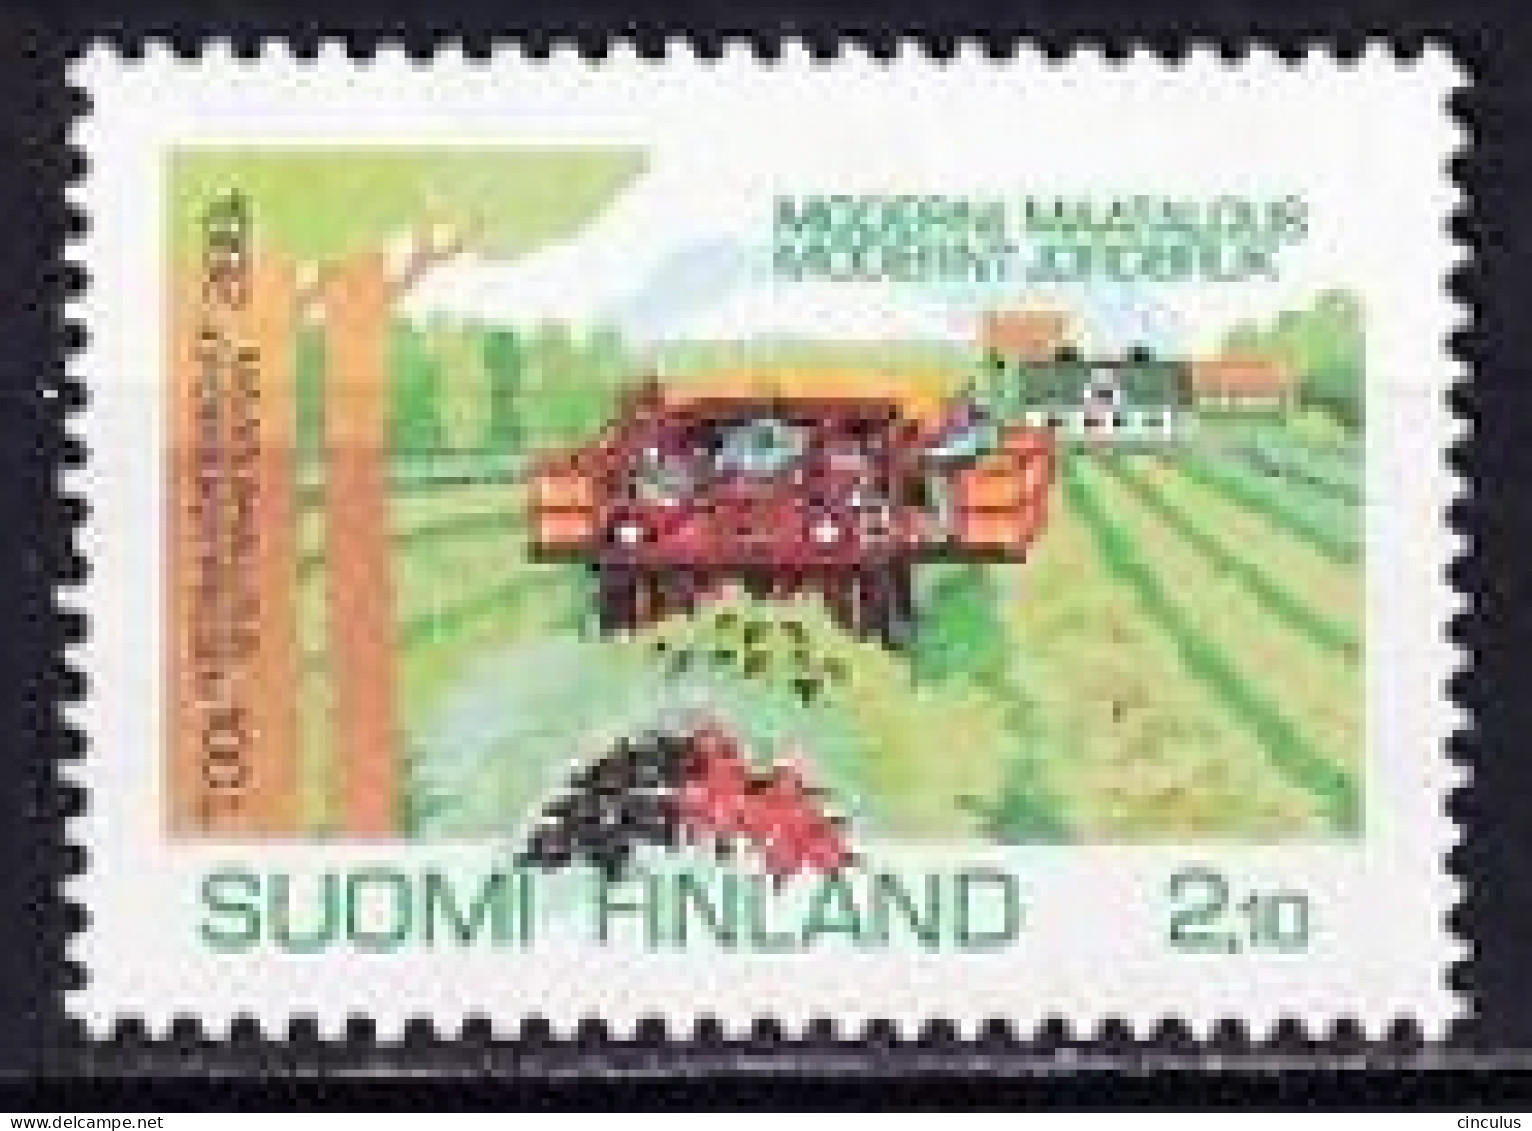 1992. Finland. 100 Years Of Central Agricultural Office. MNH. Mi. Nr. 1180 - Nuovi